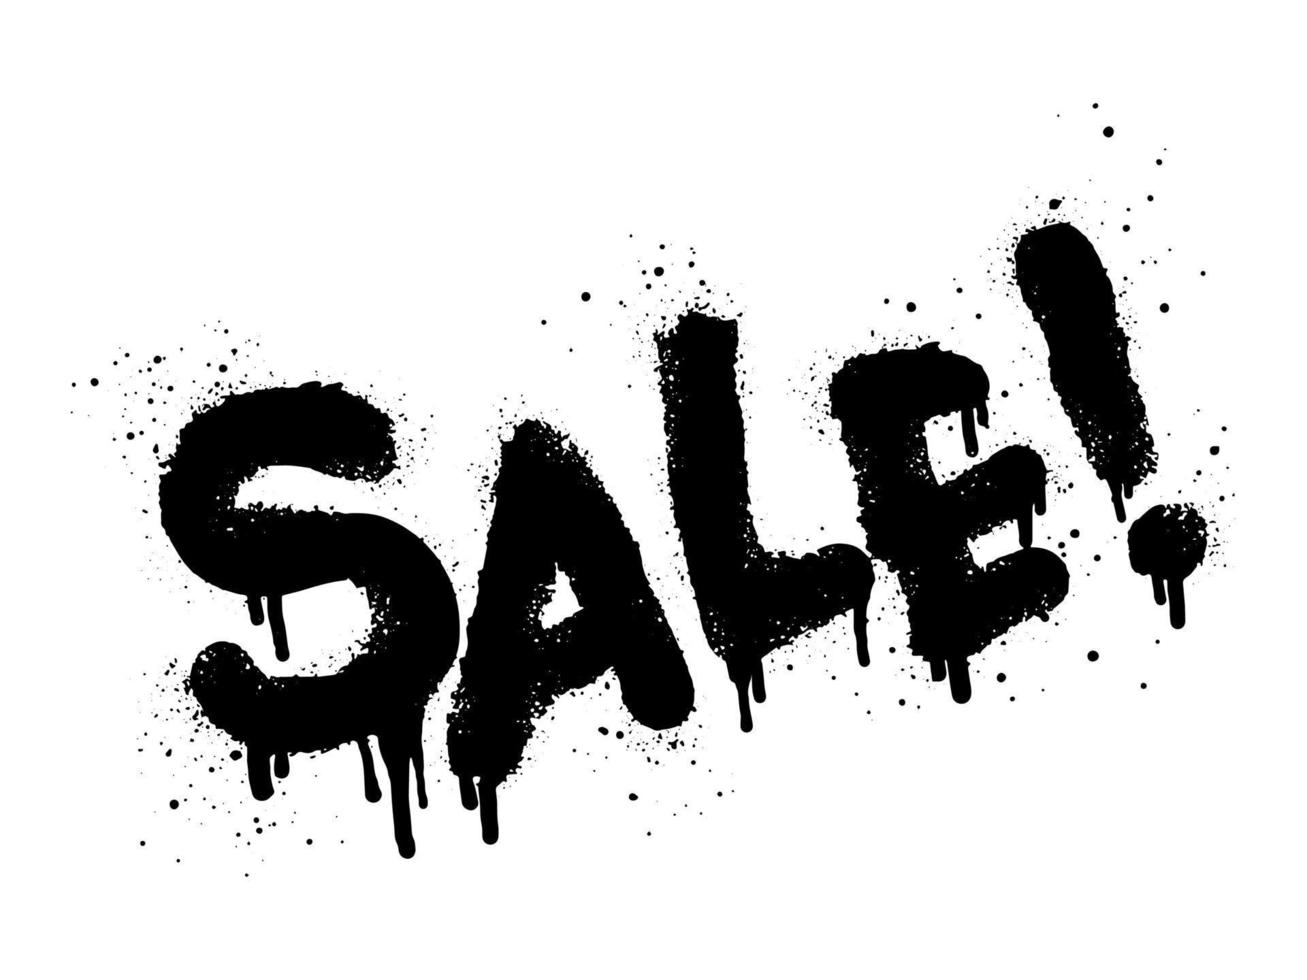 Sale symbol. Spray painted graffiti sale word in black over white. Sale drip symbol. isolated on white background. vector illustration